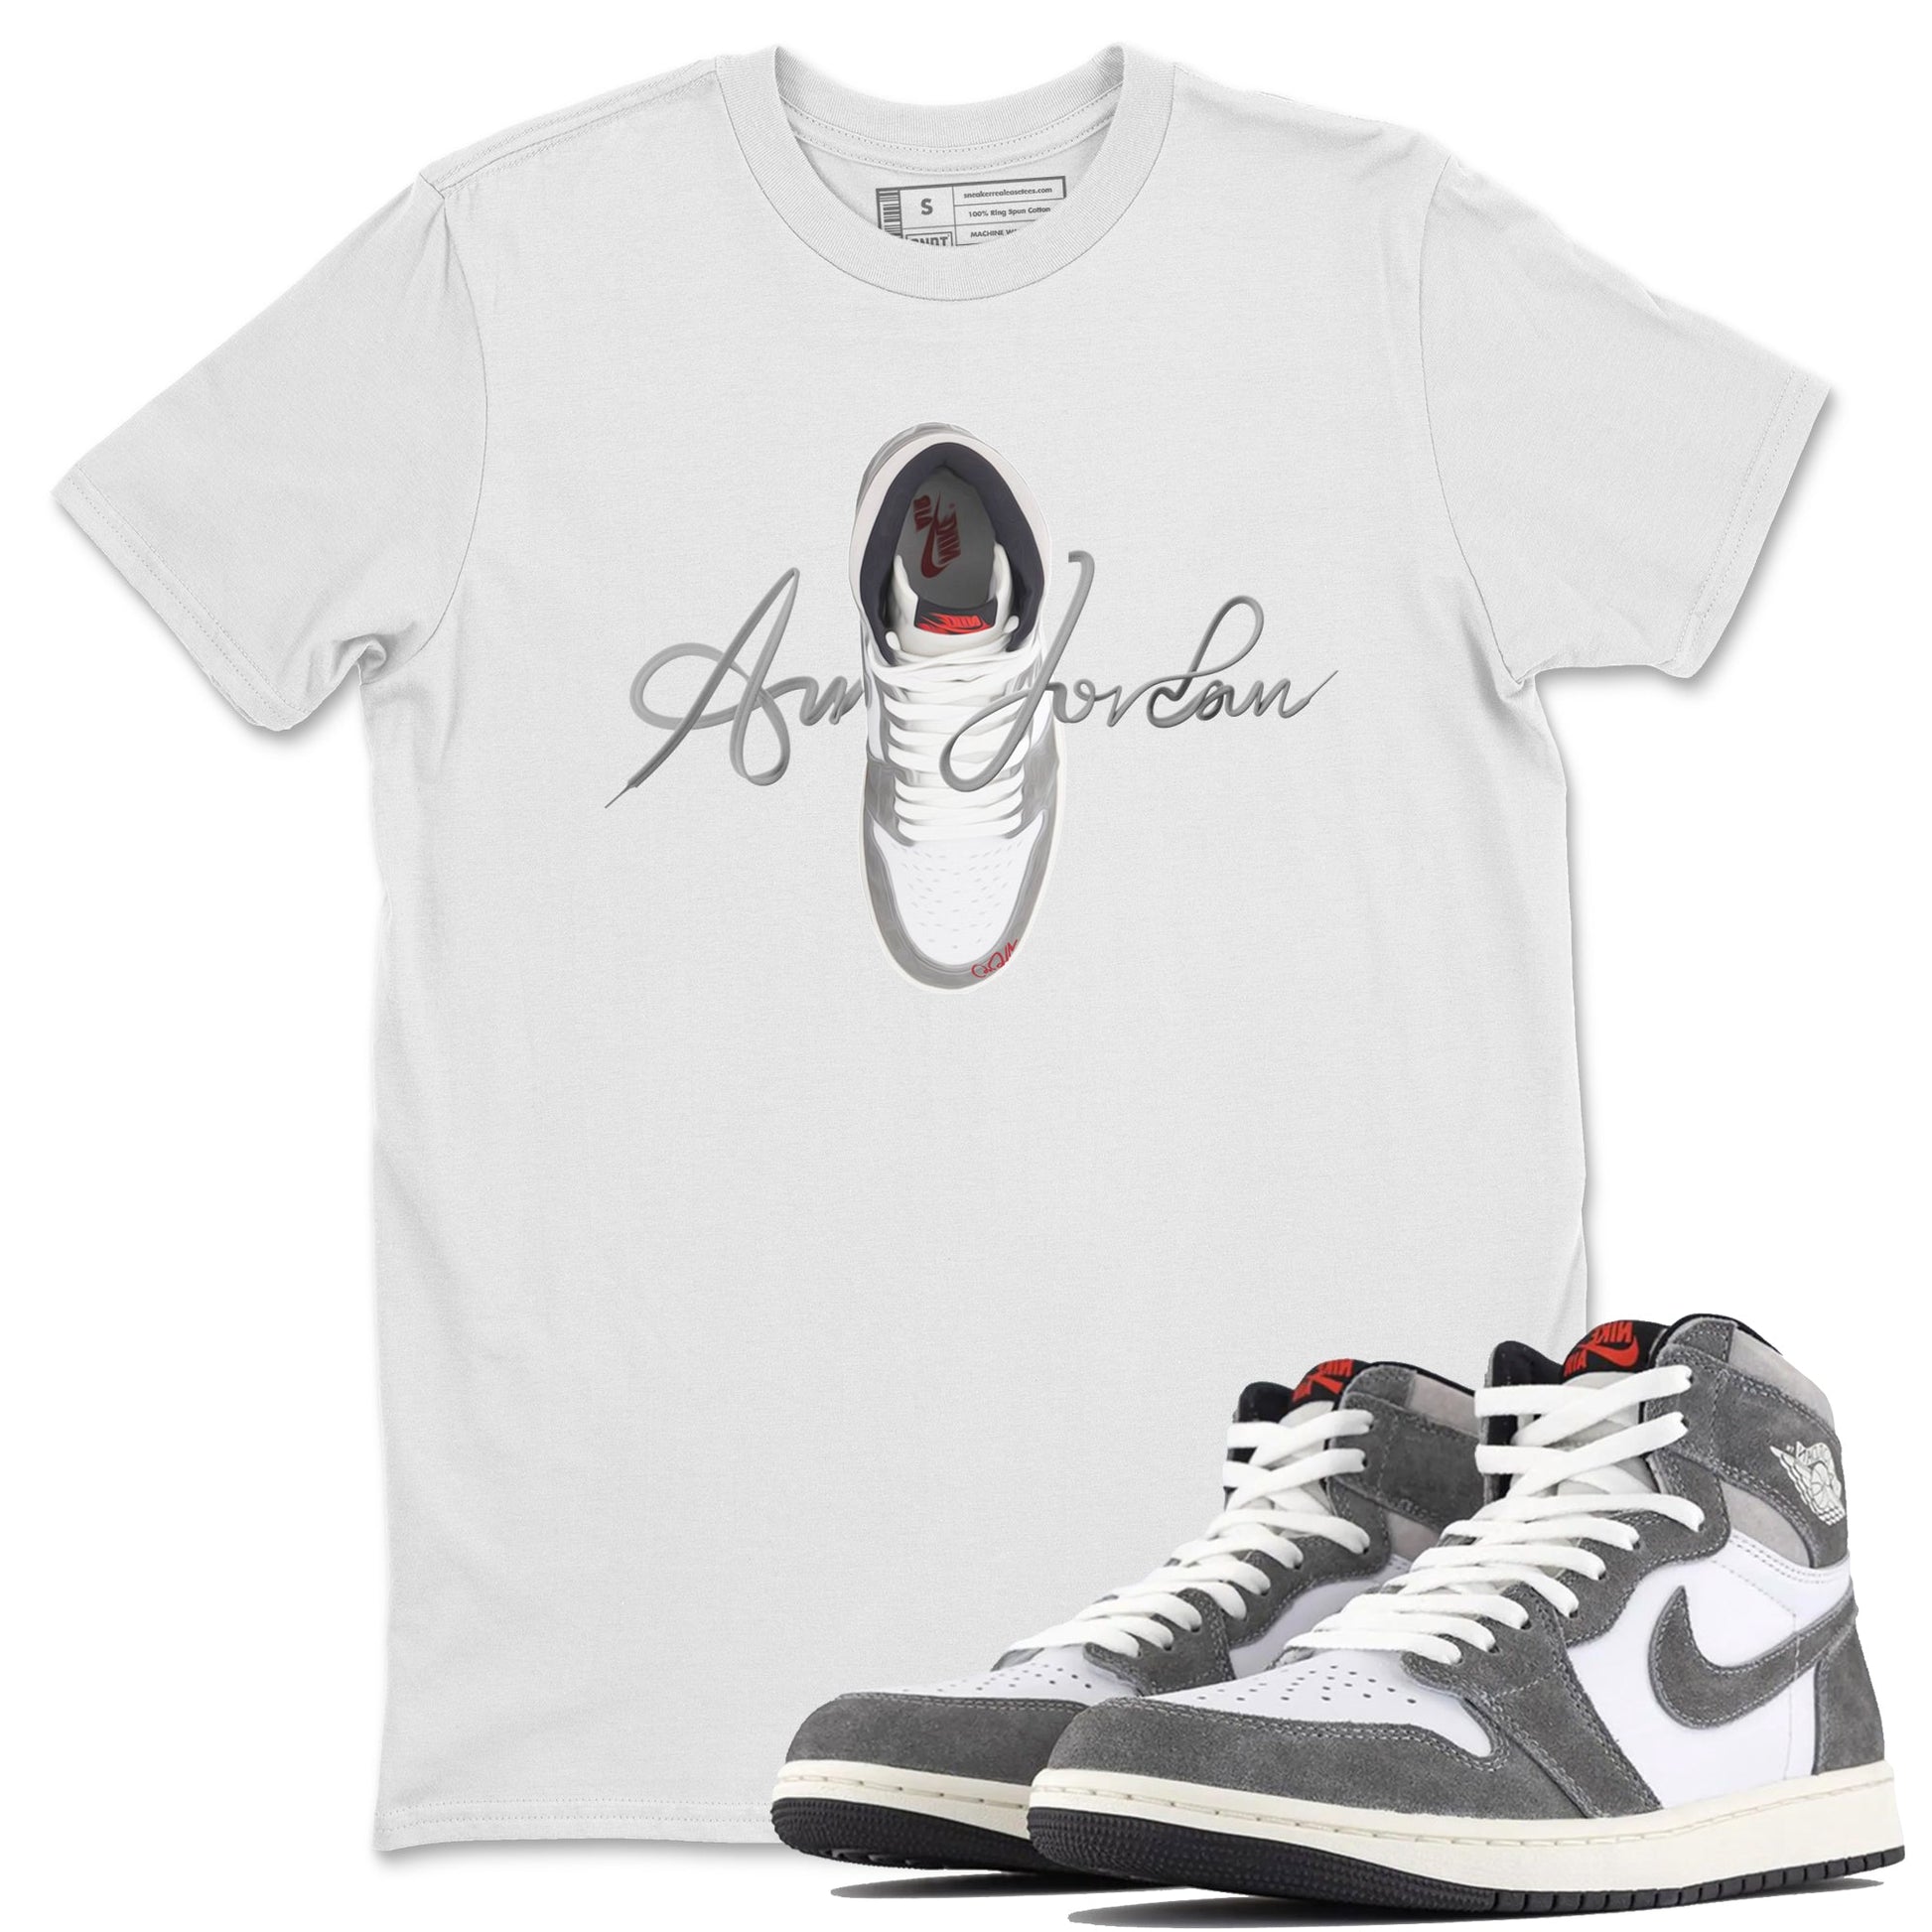 Air Jordan 1 Washed Heritage Sneaker Match Tees Caligraphy Shoe Lace Shirts AJ1 Washed Heritage Drip Gear Zone Unisex Shirts White 1